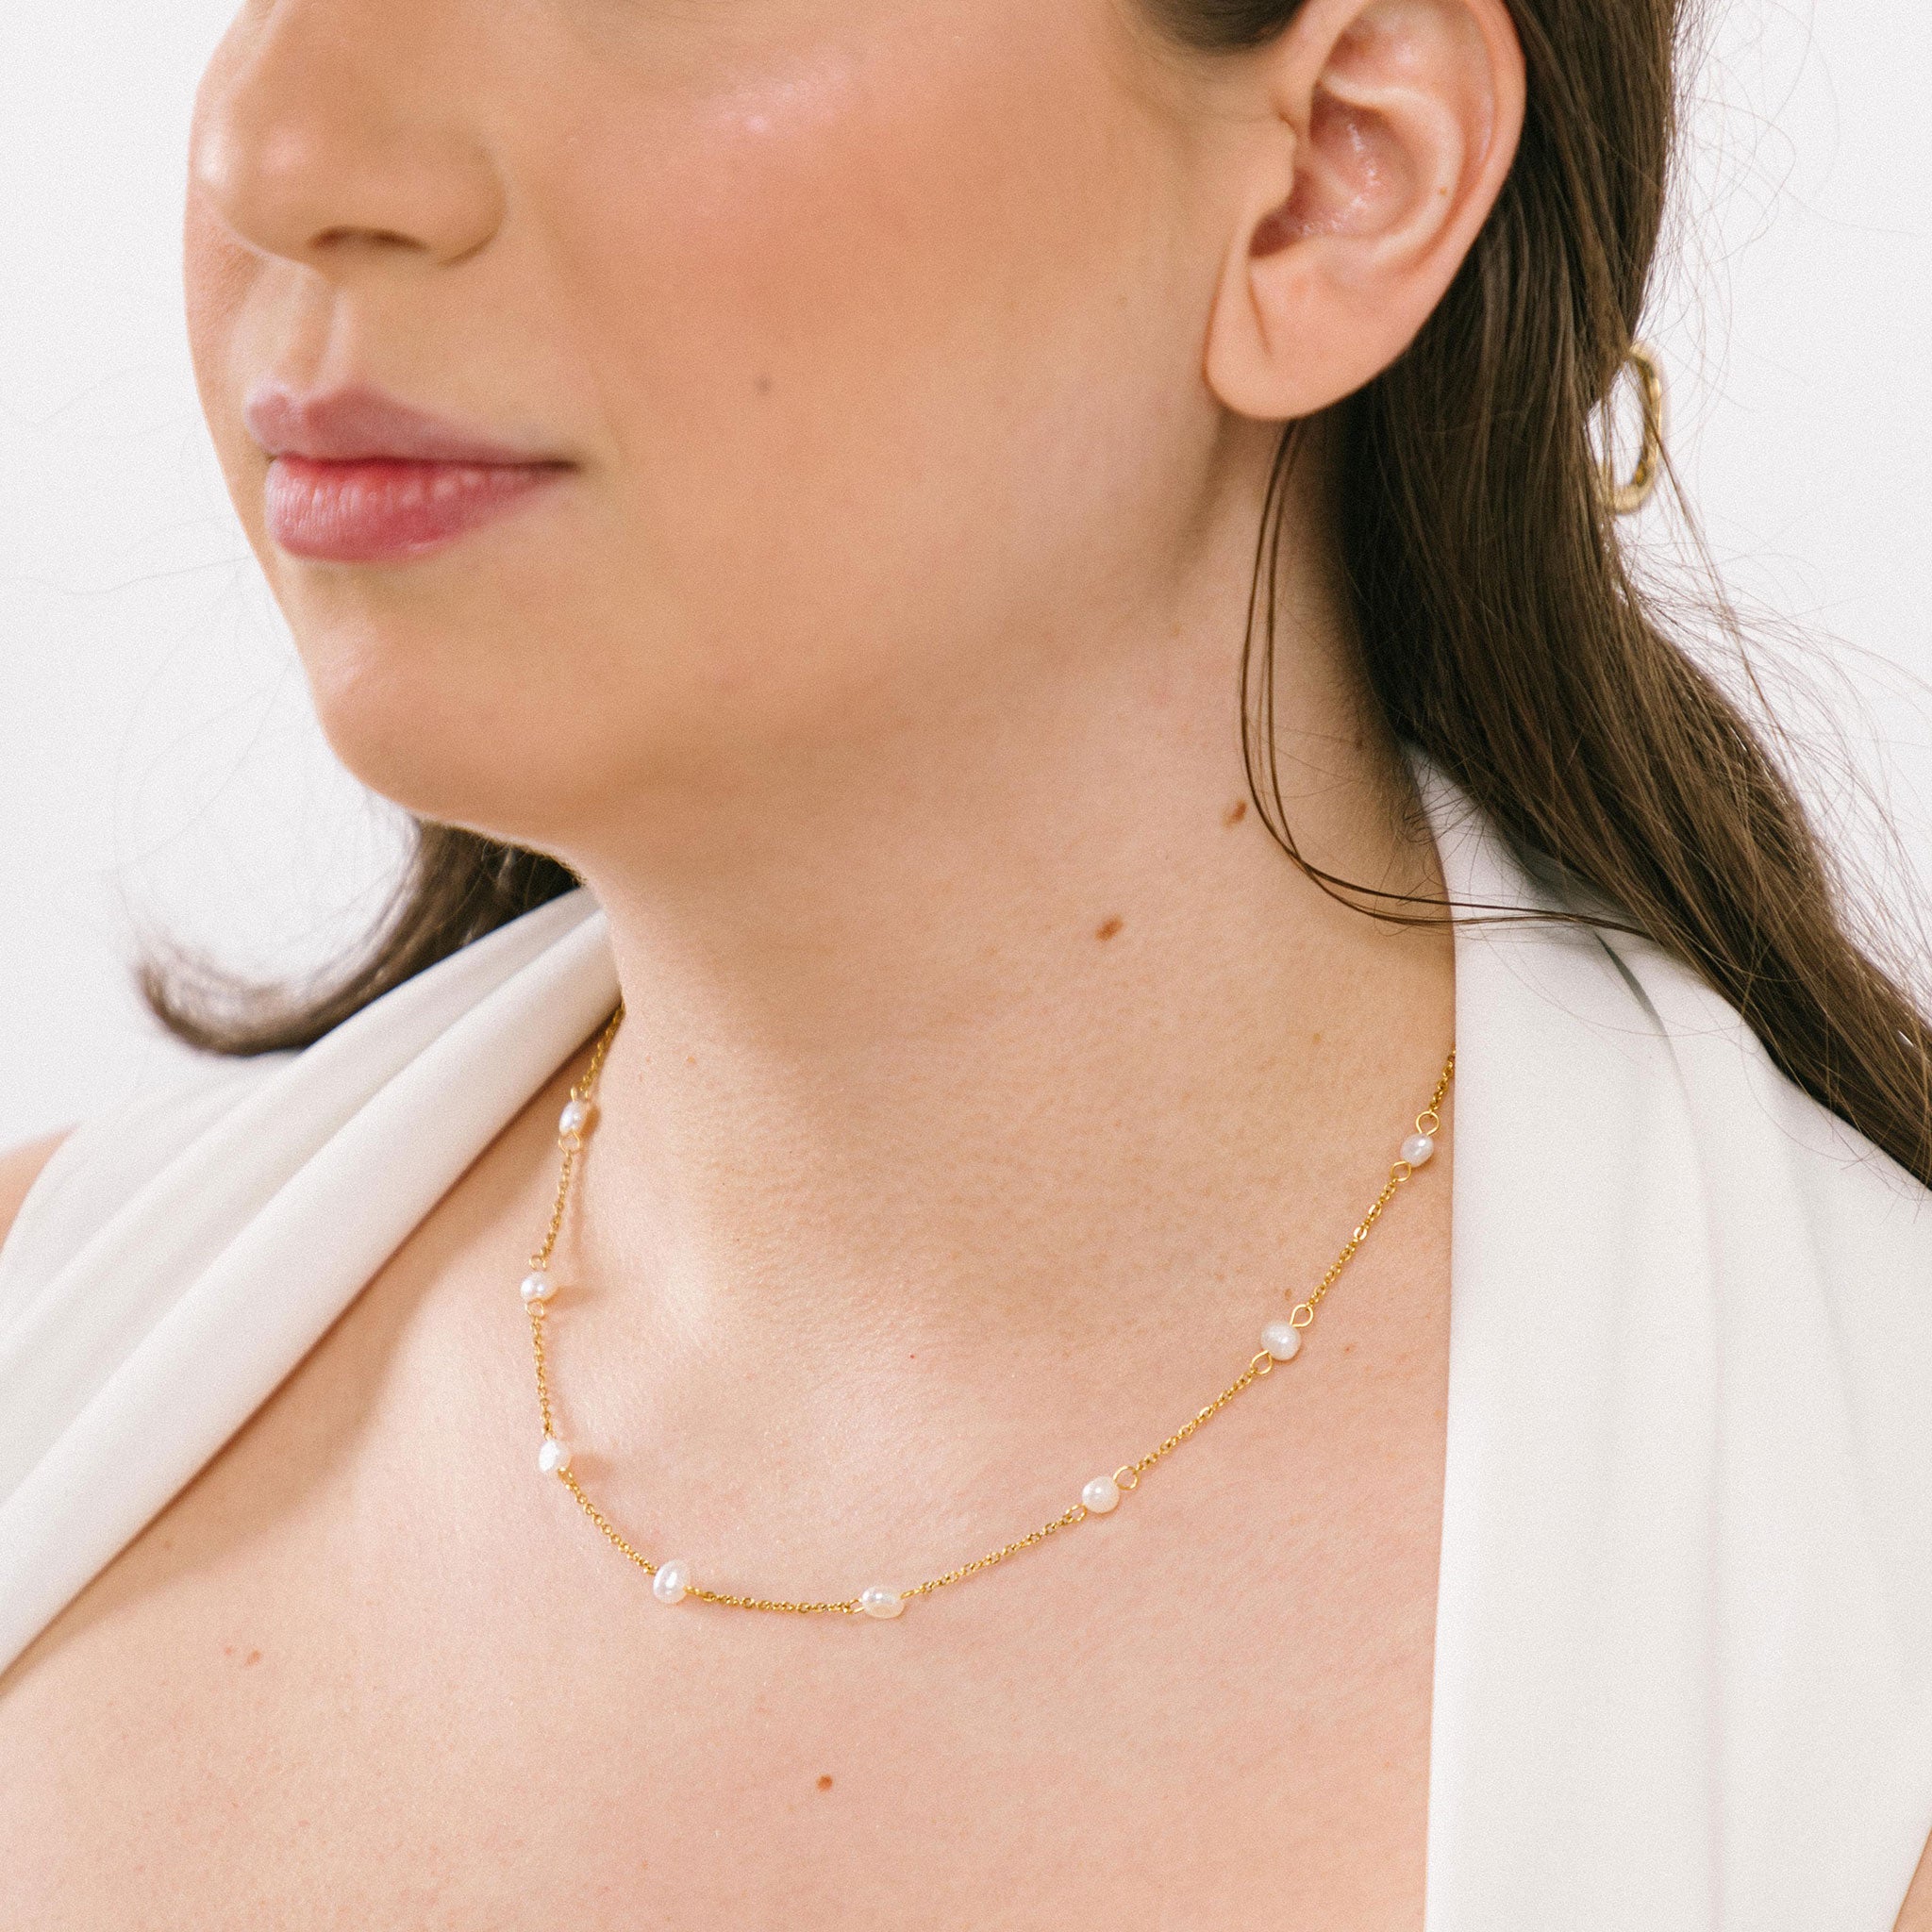 A model wearing the Elena Pearl Necklace is adjustable and crafted from Freshwater Pearls, 18K Gold Plated Stainless Steel, and is waterproof and hypoallergenic. Each pearl may vary slightly in size and colour due to its natural characteristics.